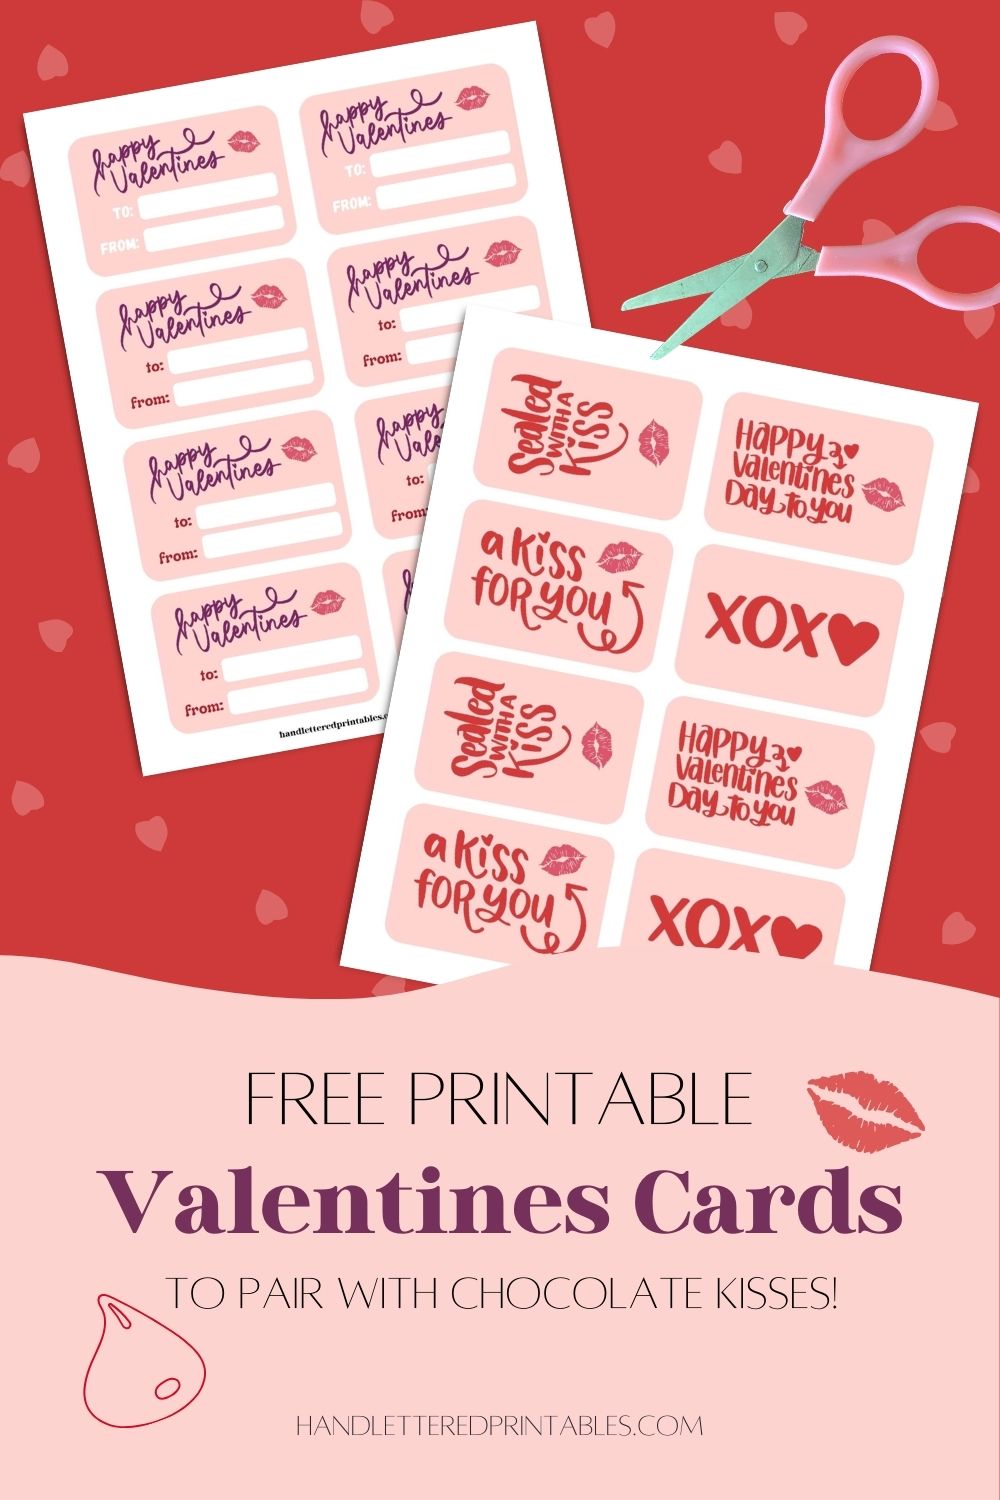 image of printed valentines (front and back) with plays on kisses and valentines day. text over reads free printable Valentines cards to pair with chocolate kisses